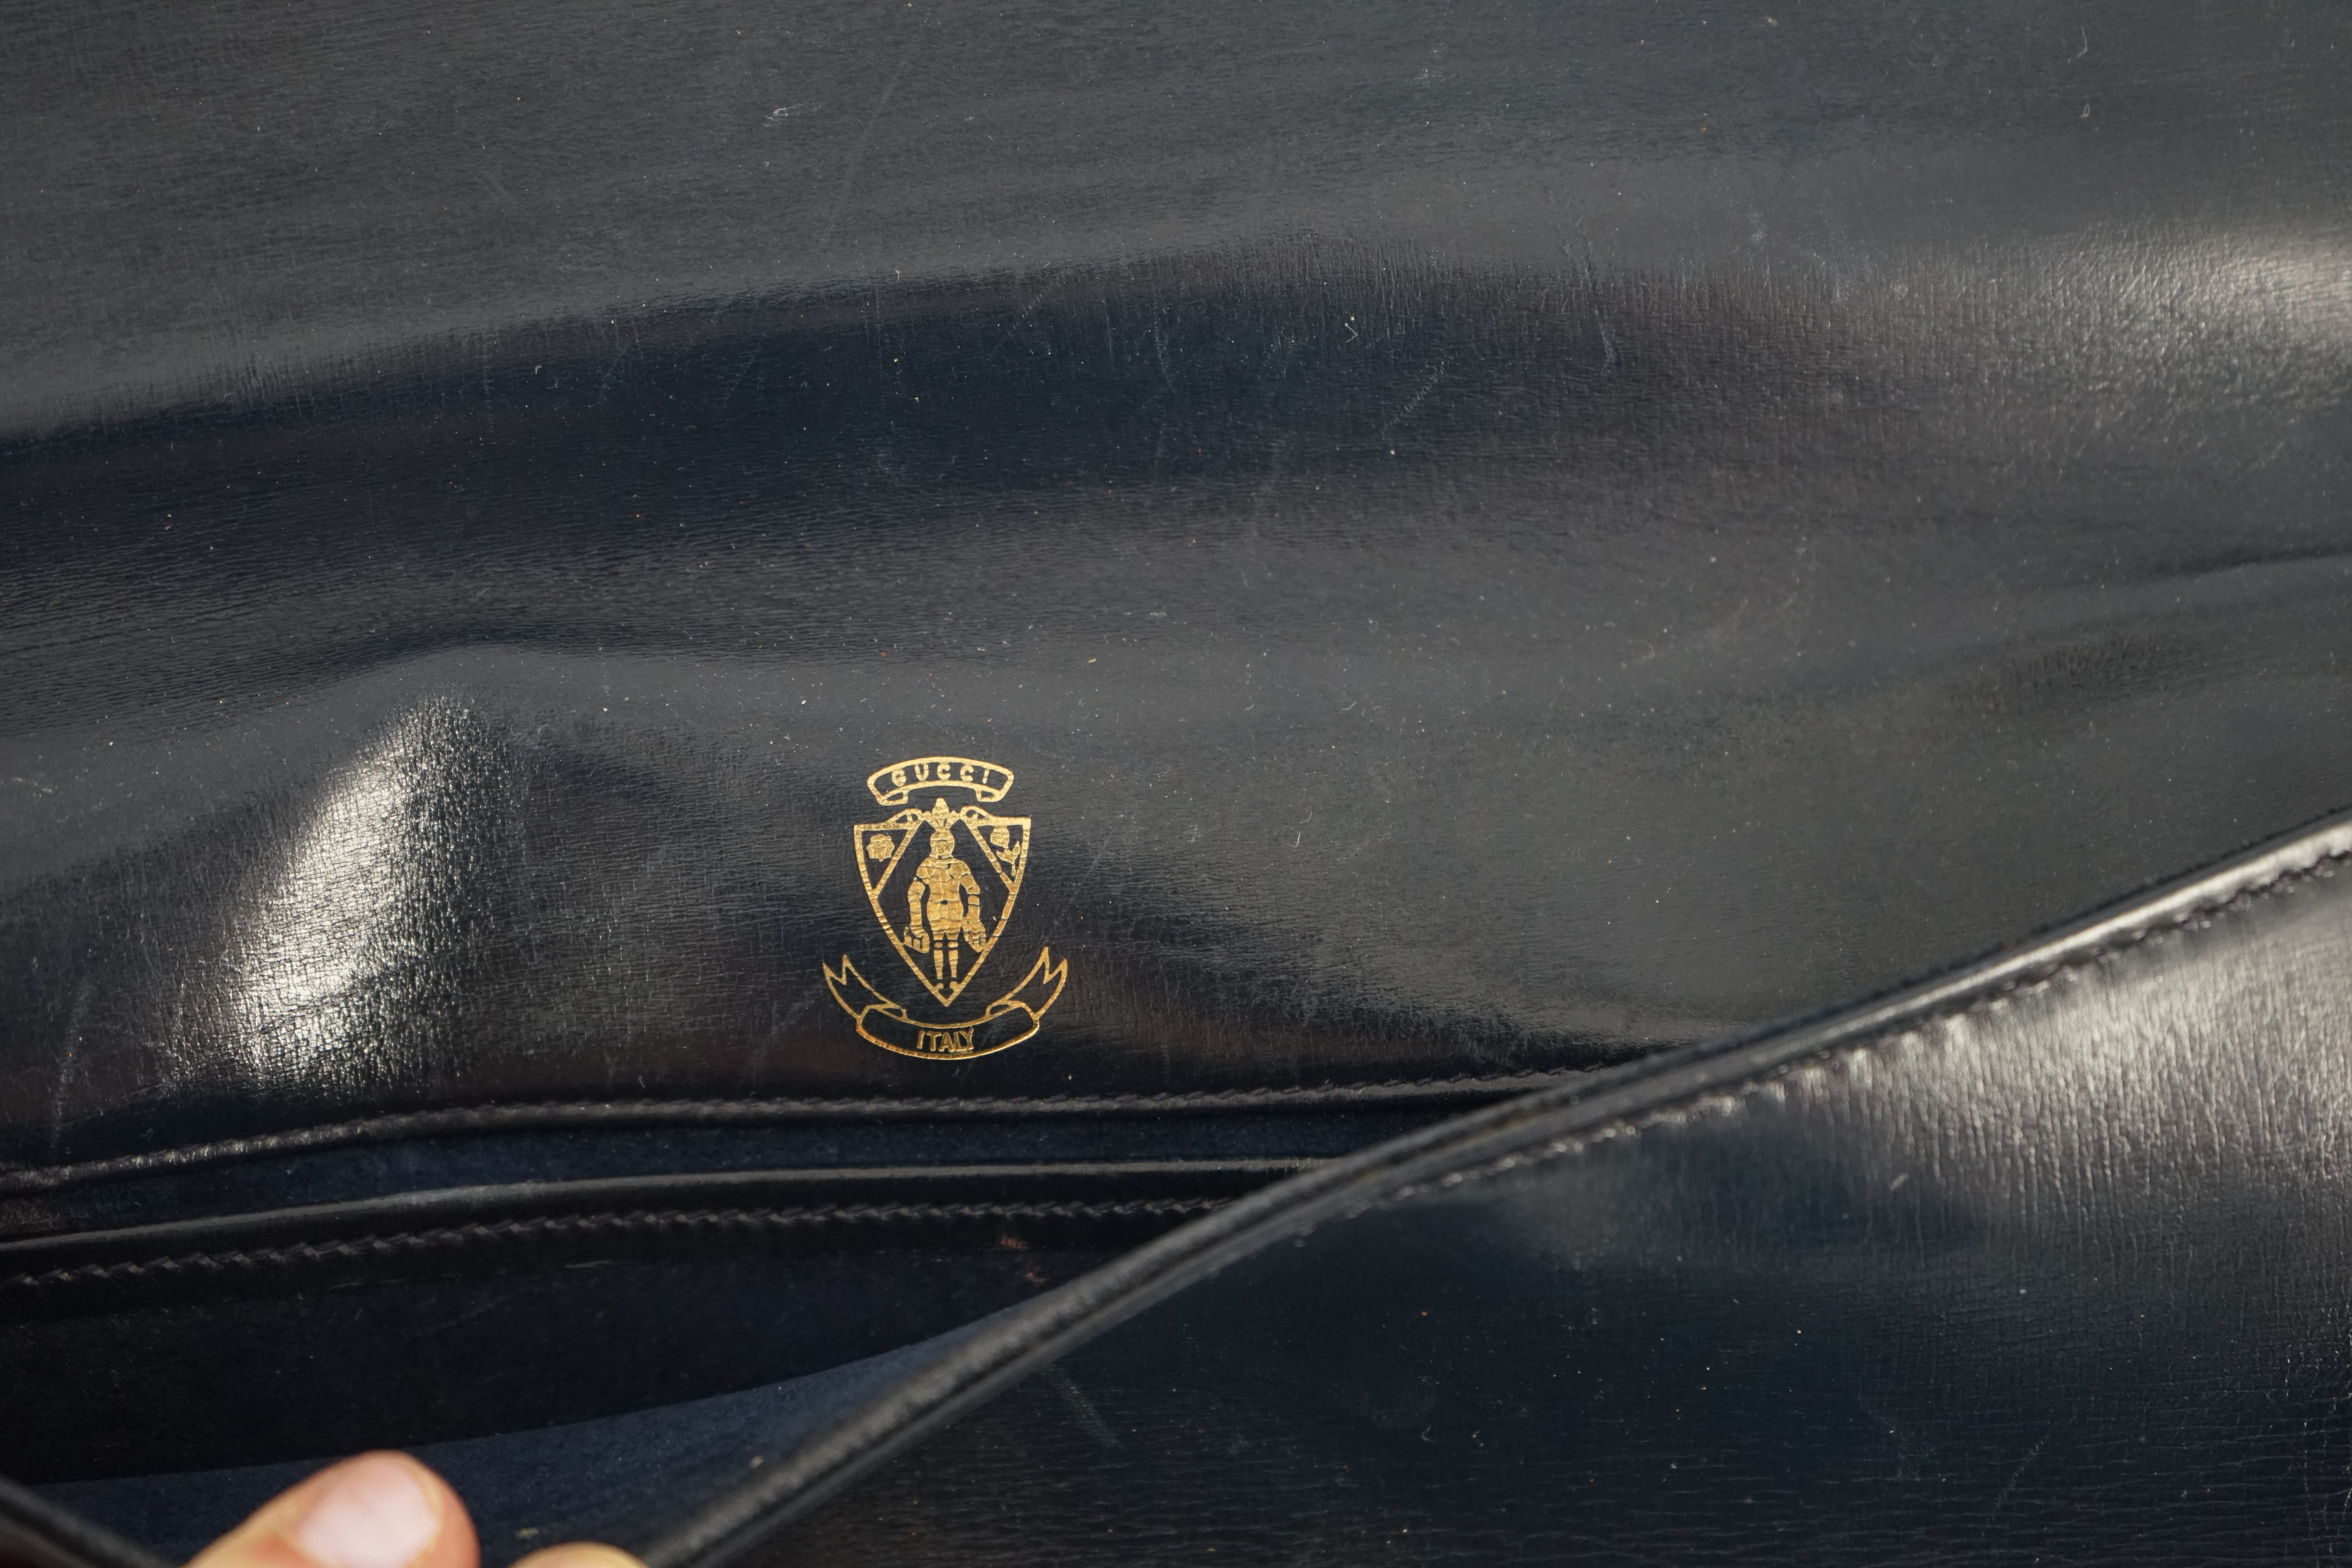 A vintage Gucci Blondie Unicorn navy leather clutch bag, Gold Gucci front logo, weighted closure, - Image 4 of 4